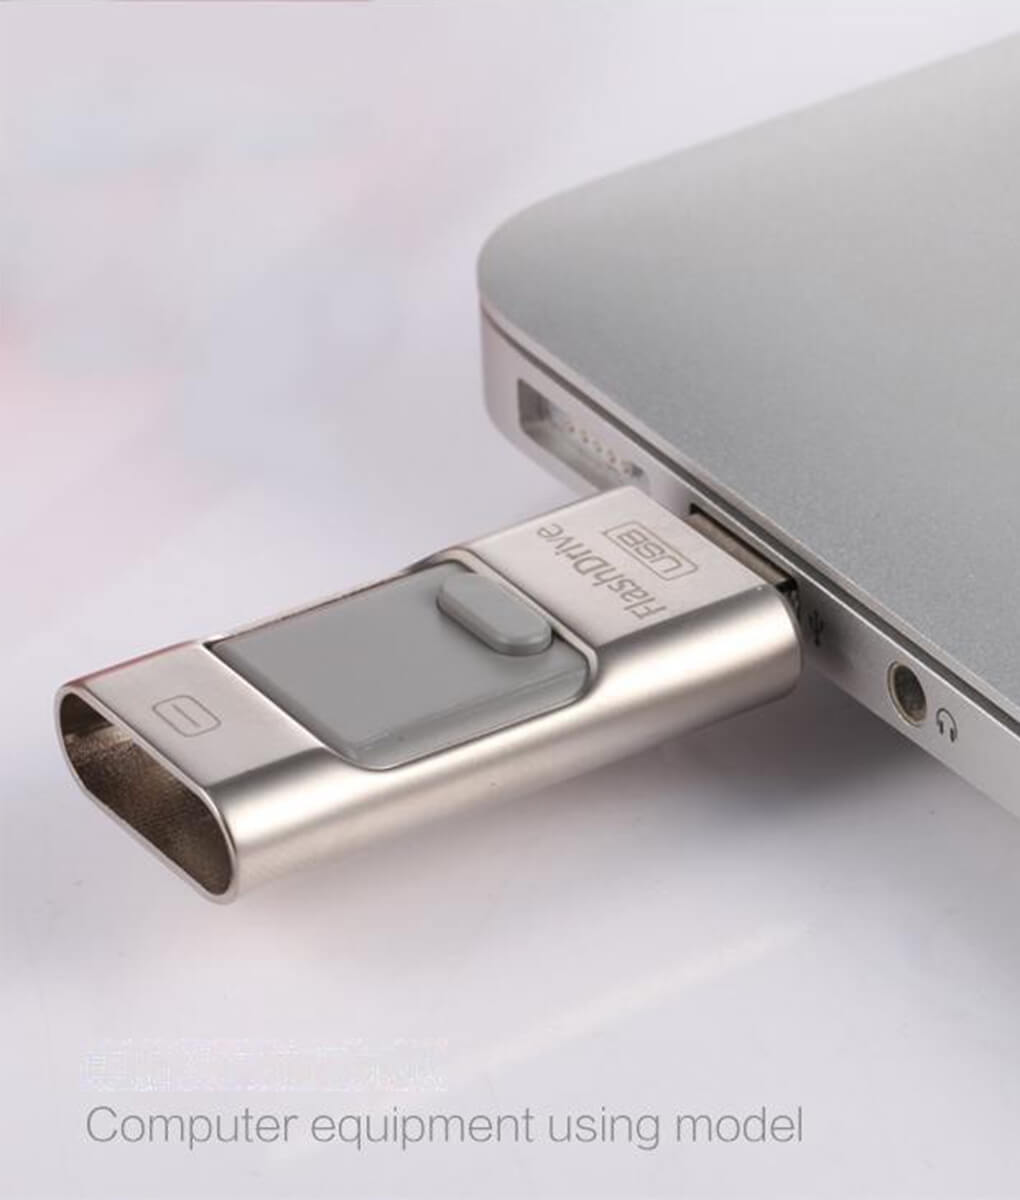 iOS Flash USB Drive for iPhone & iPad - Not sold in stores